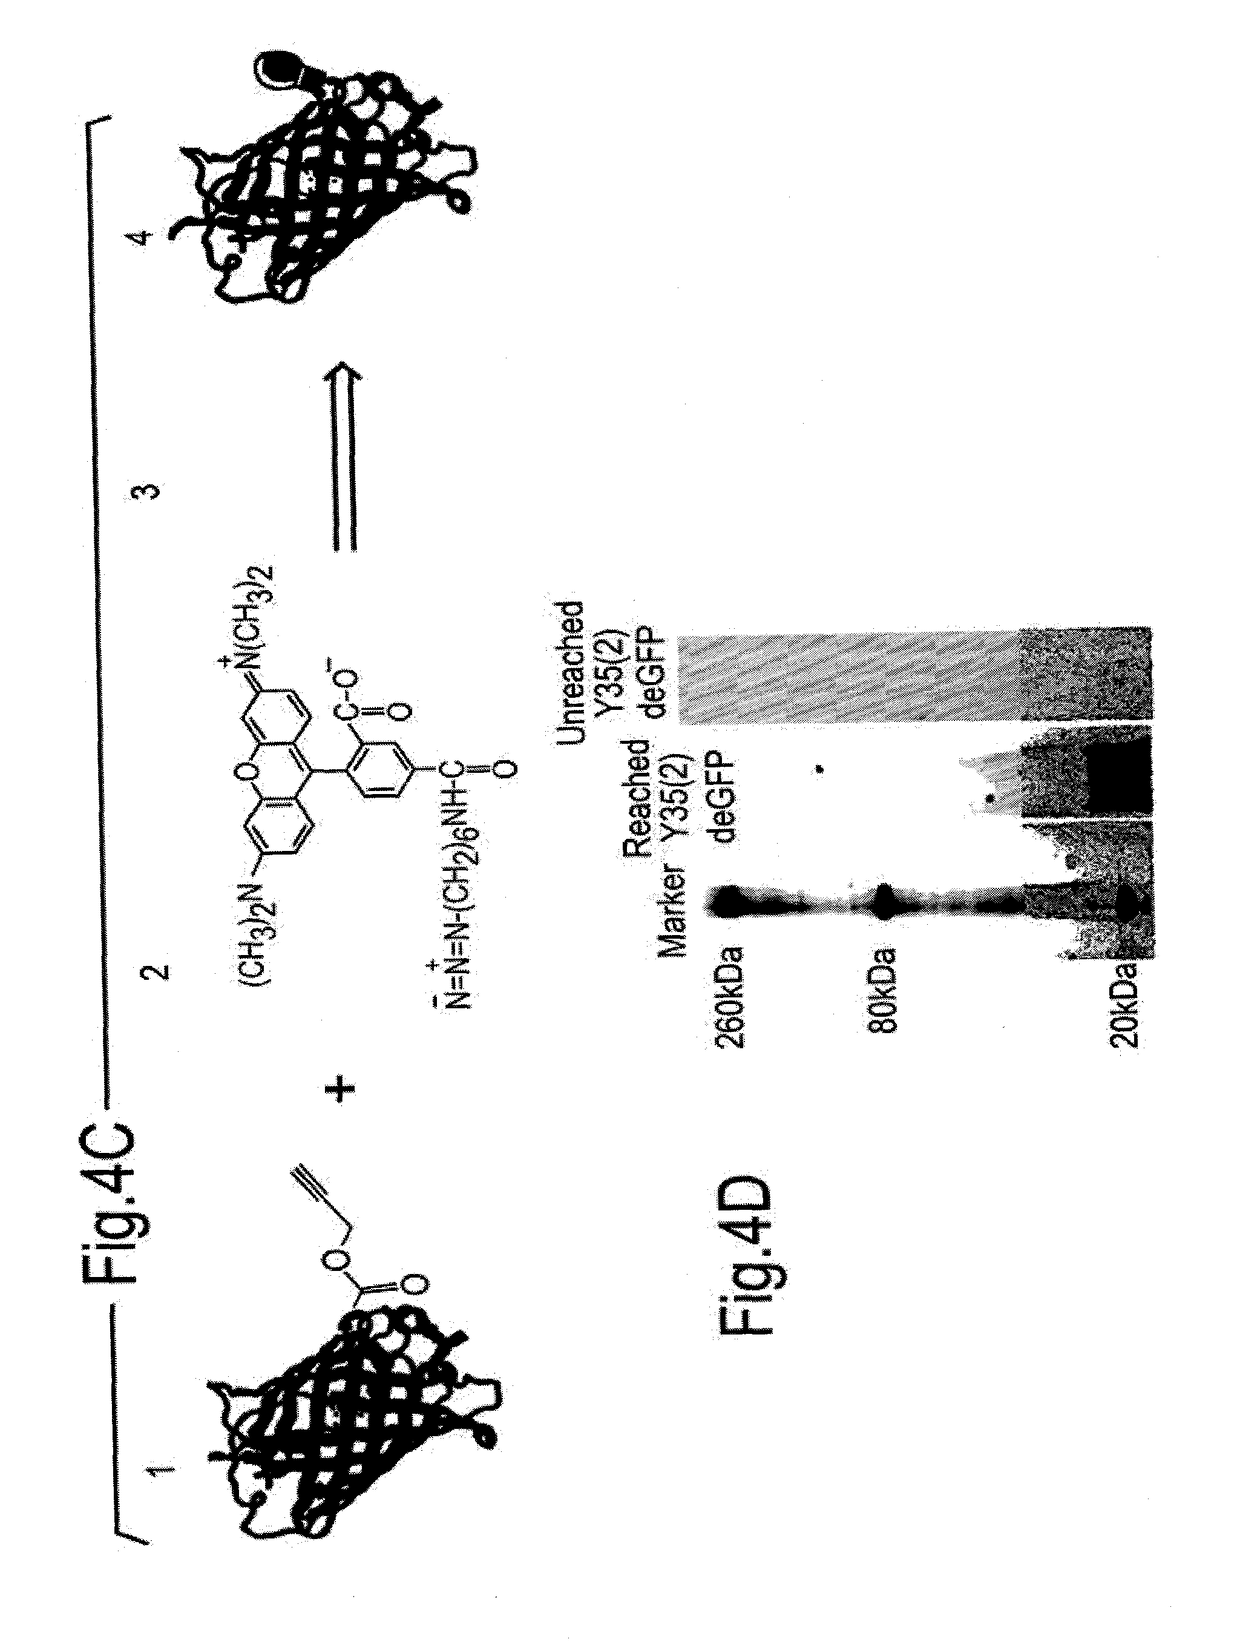 Genetically expanded cell free protein synthesis systems, methods and kits